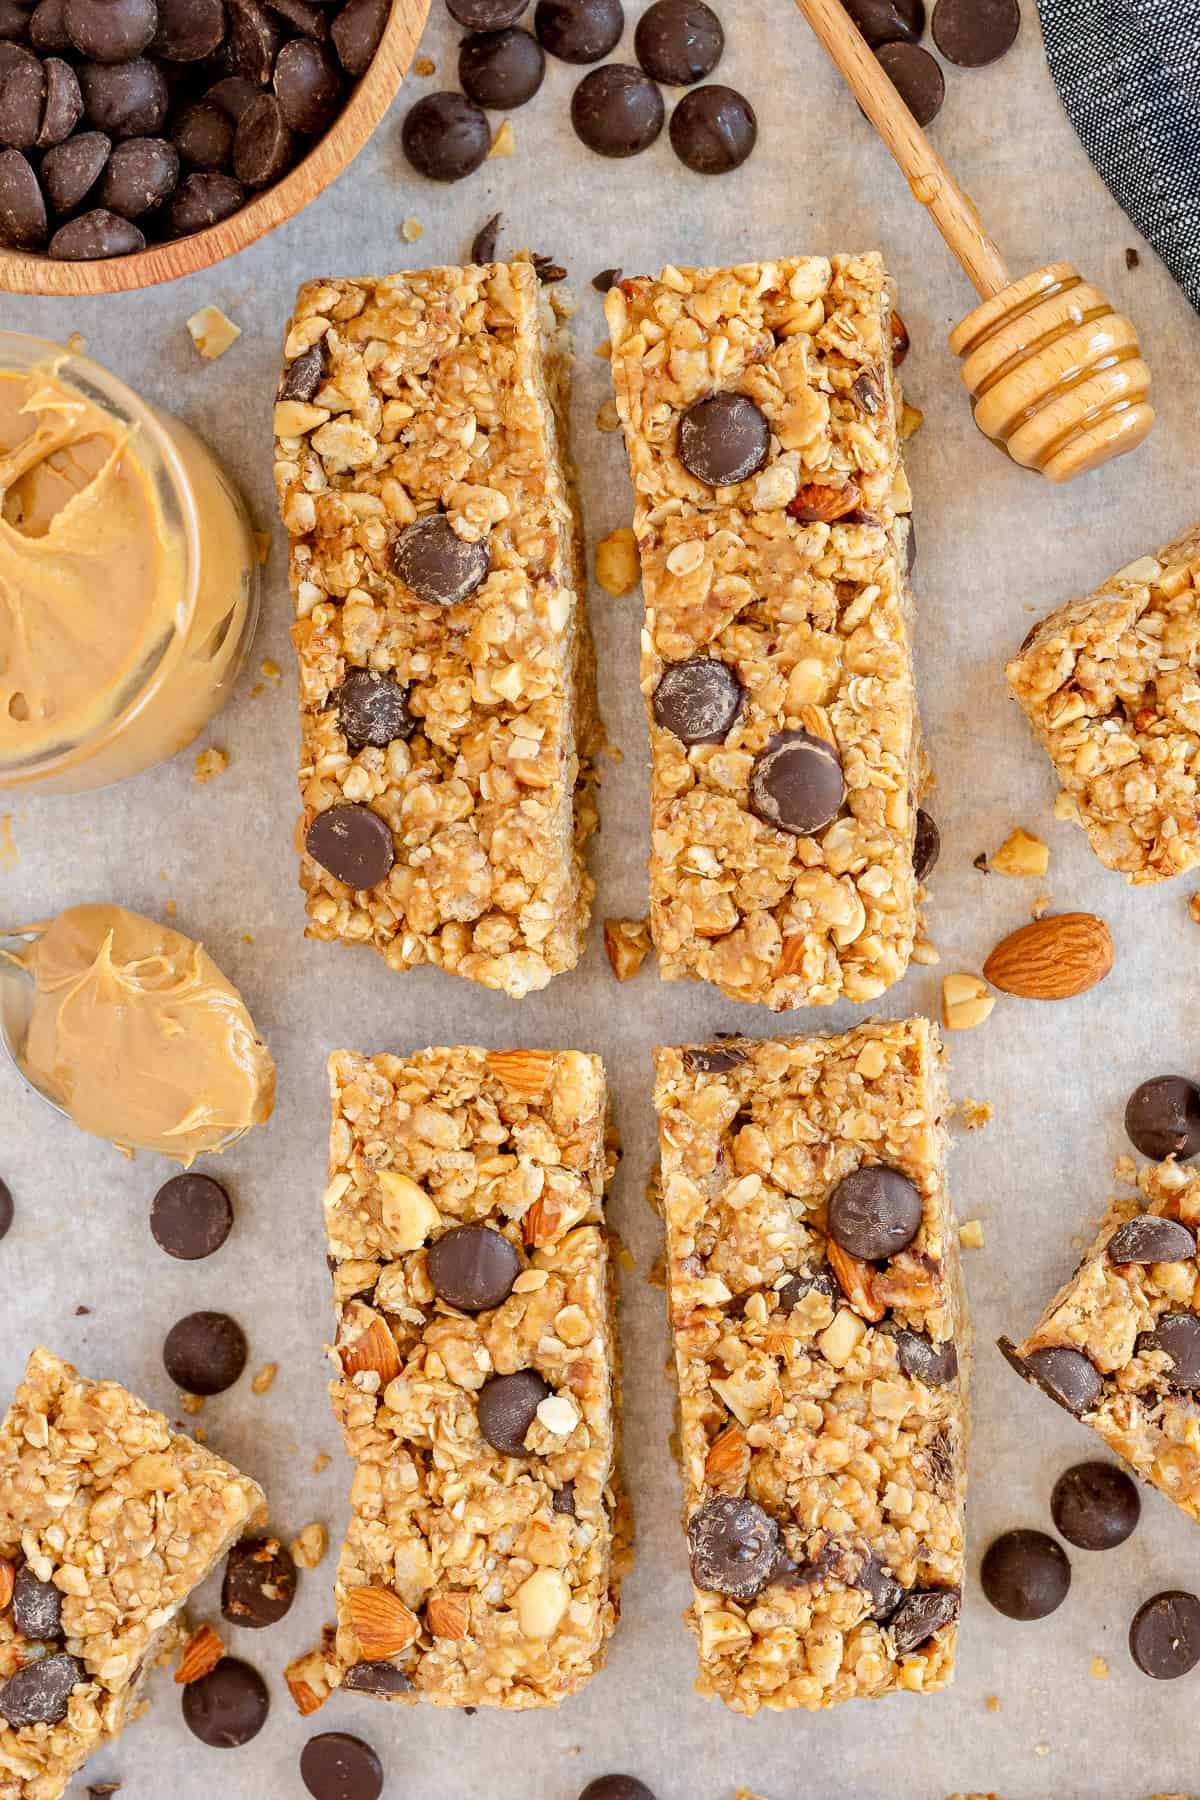 Four granola bars with chocolate chips on a board with peanut butter, honey, and almonds.